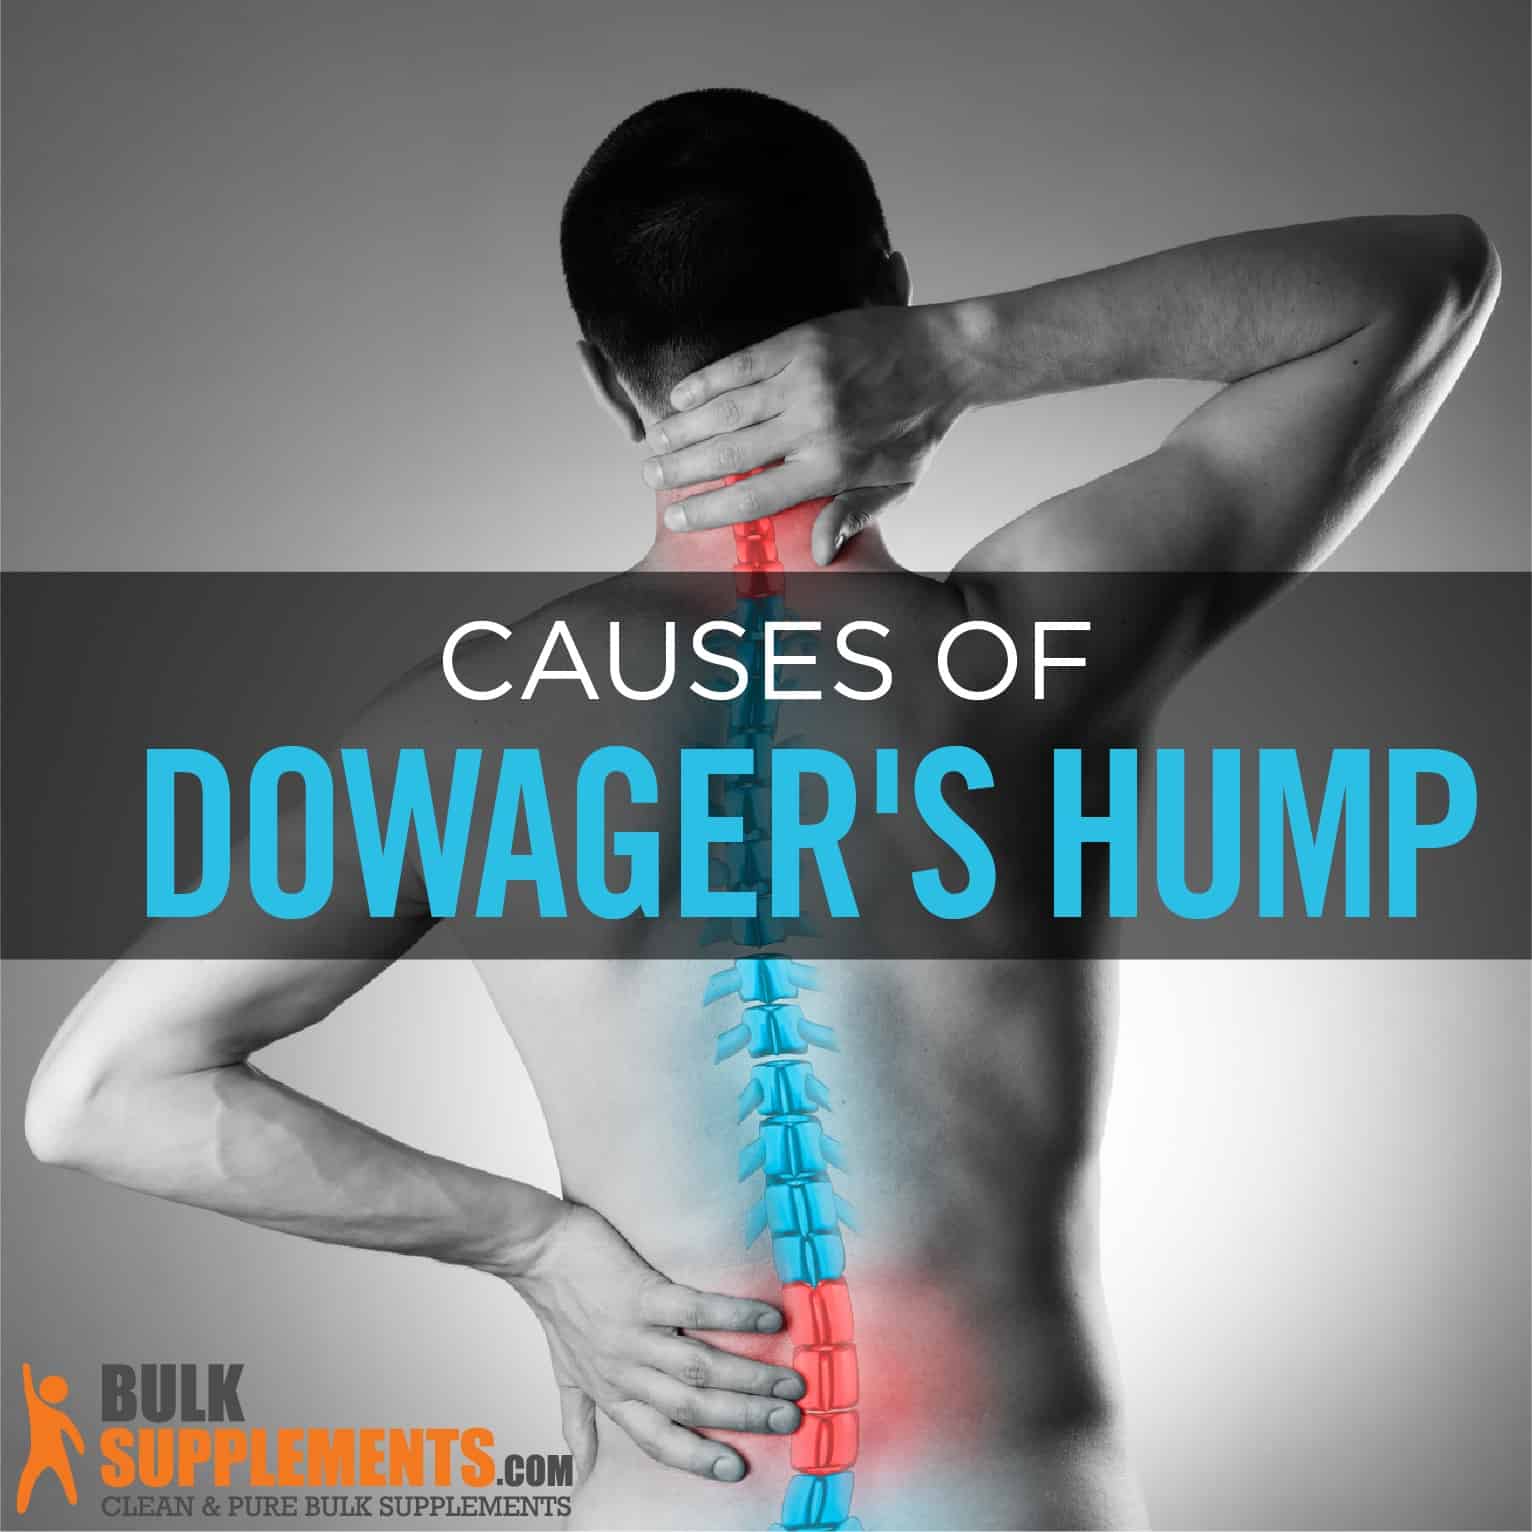 Dowager's Hump: Causes, Symptoms, and Treatment